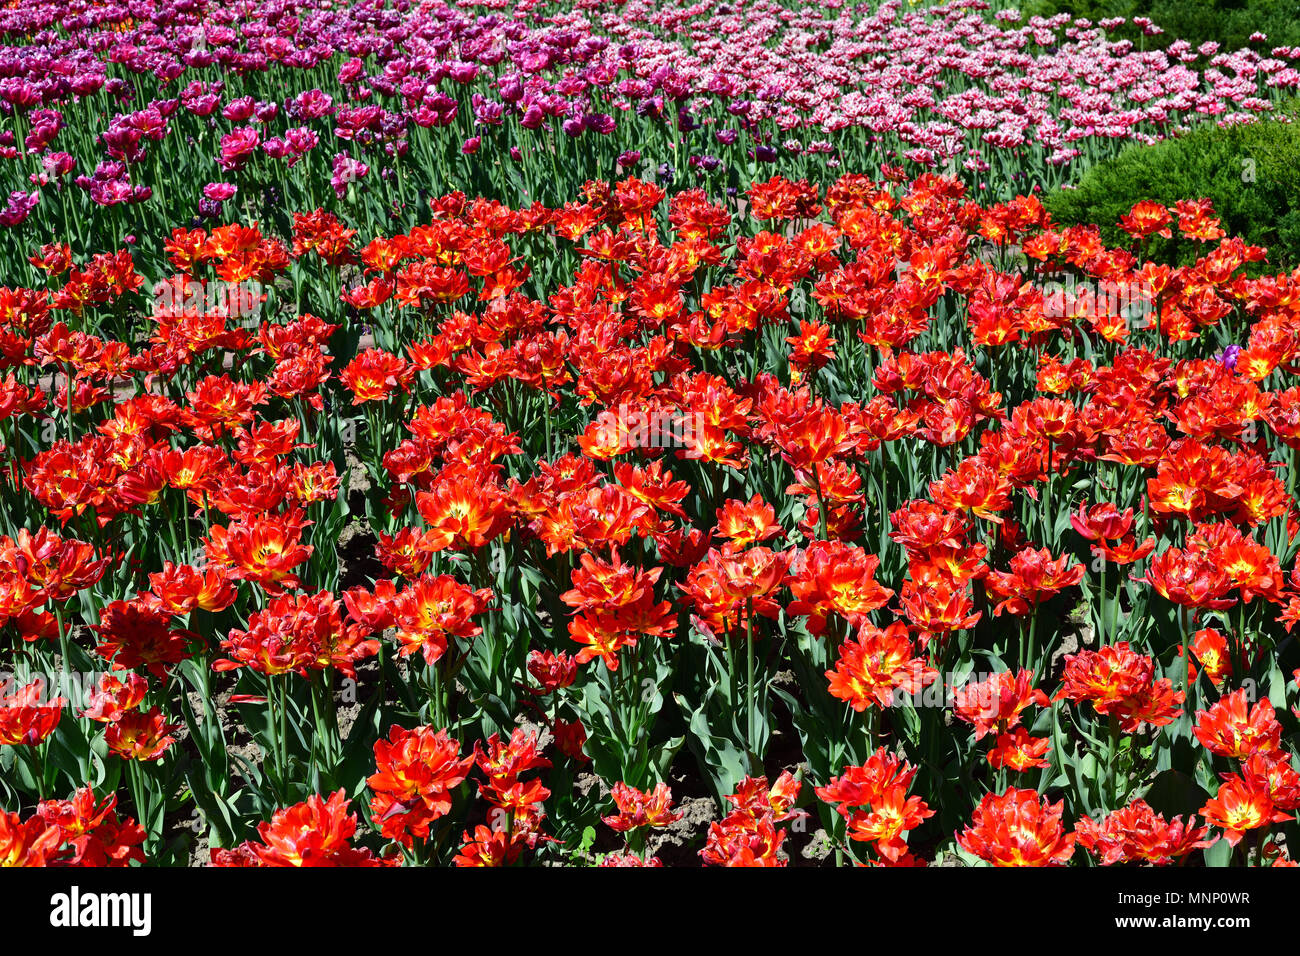 Large flower bed with pink and red tulips terry Stock Photo